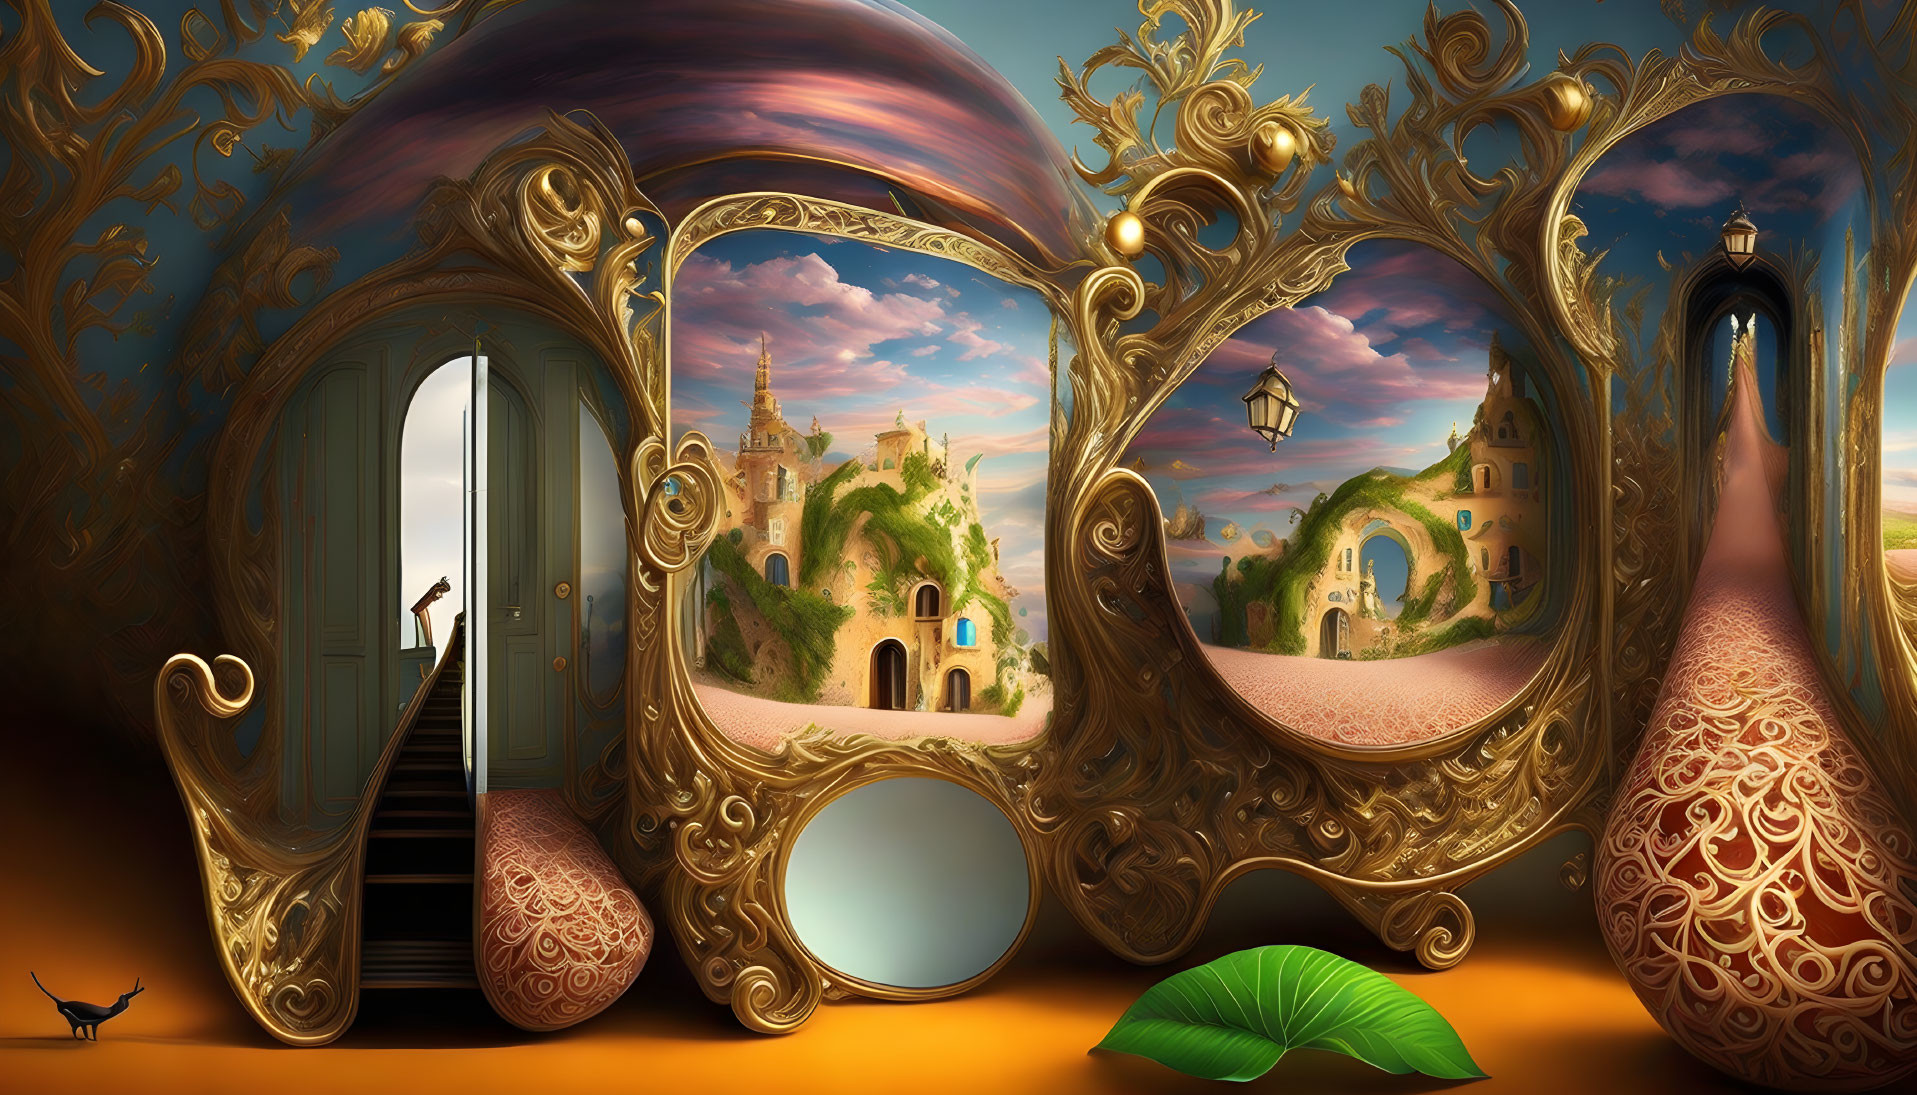 Whimsical surreal landscape with golden swirls and floating objects